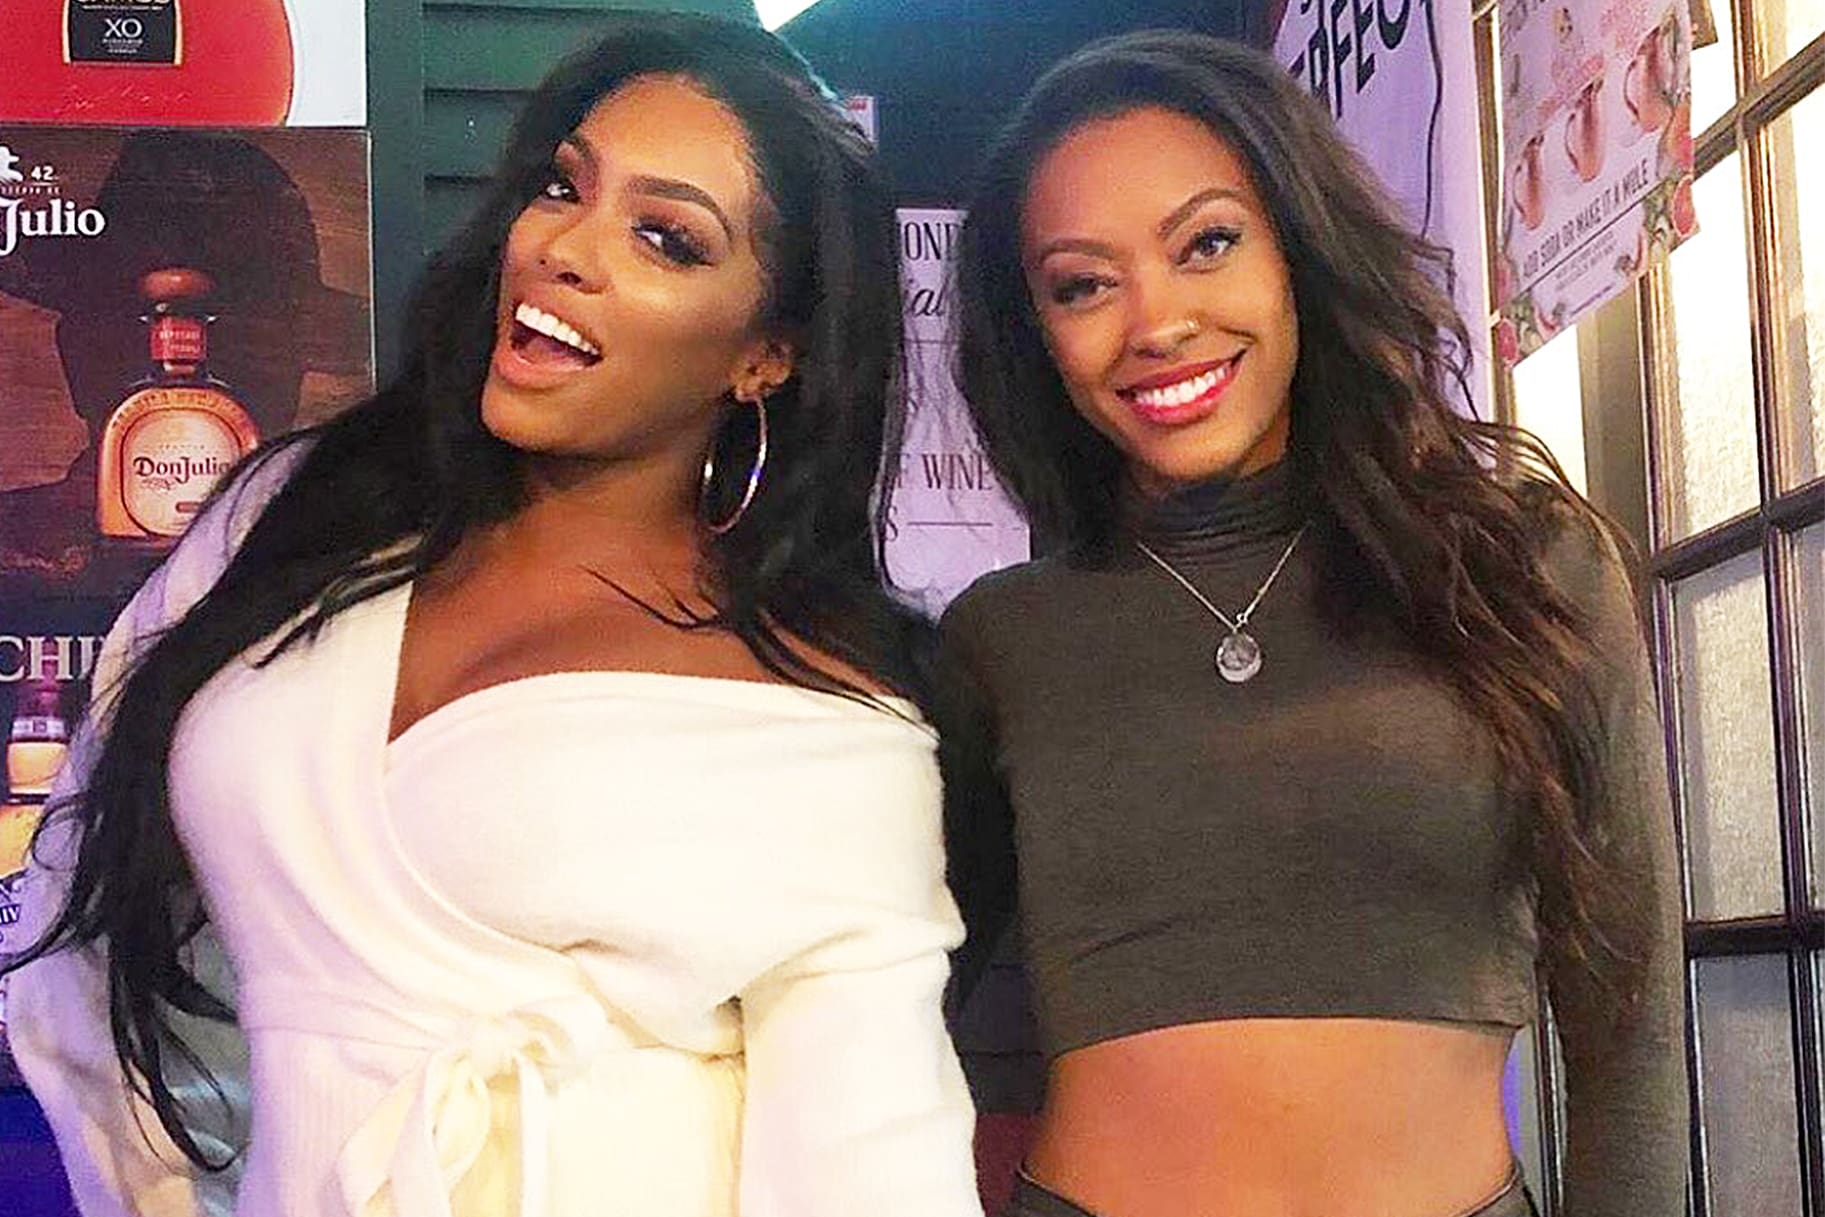 Porsha Williams' Sister, Lauren Williams Posted On Her IG Account While She Was Arrested